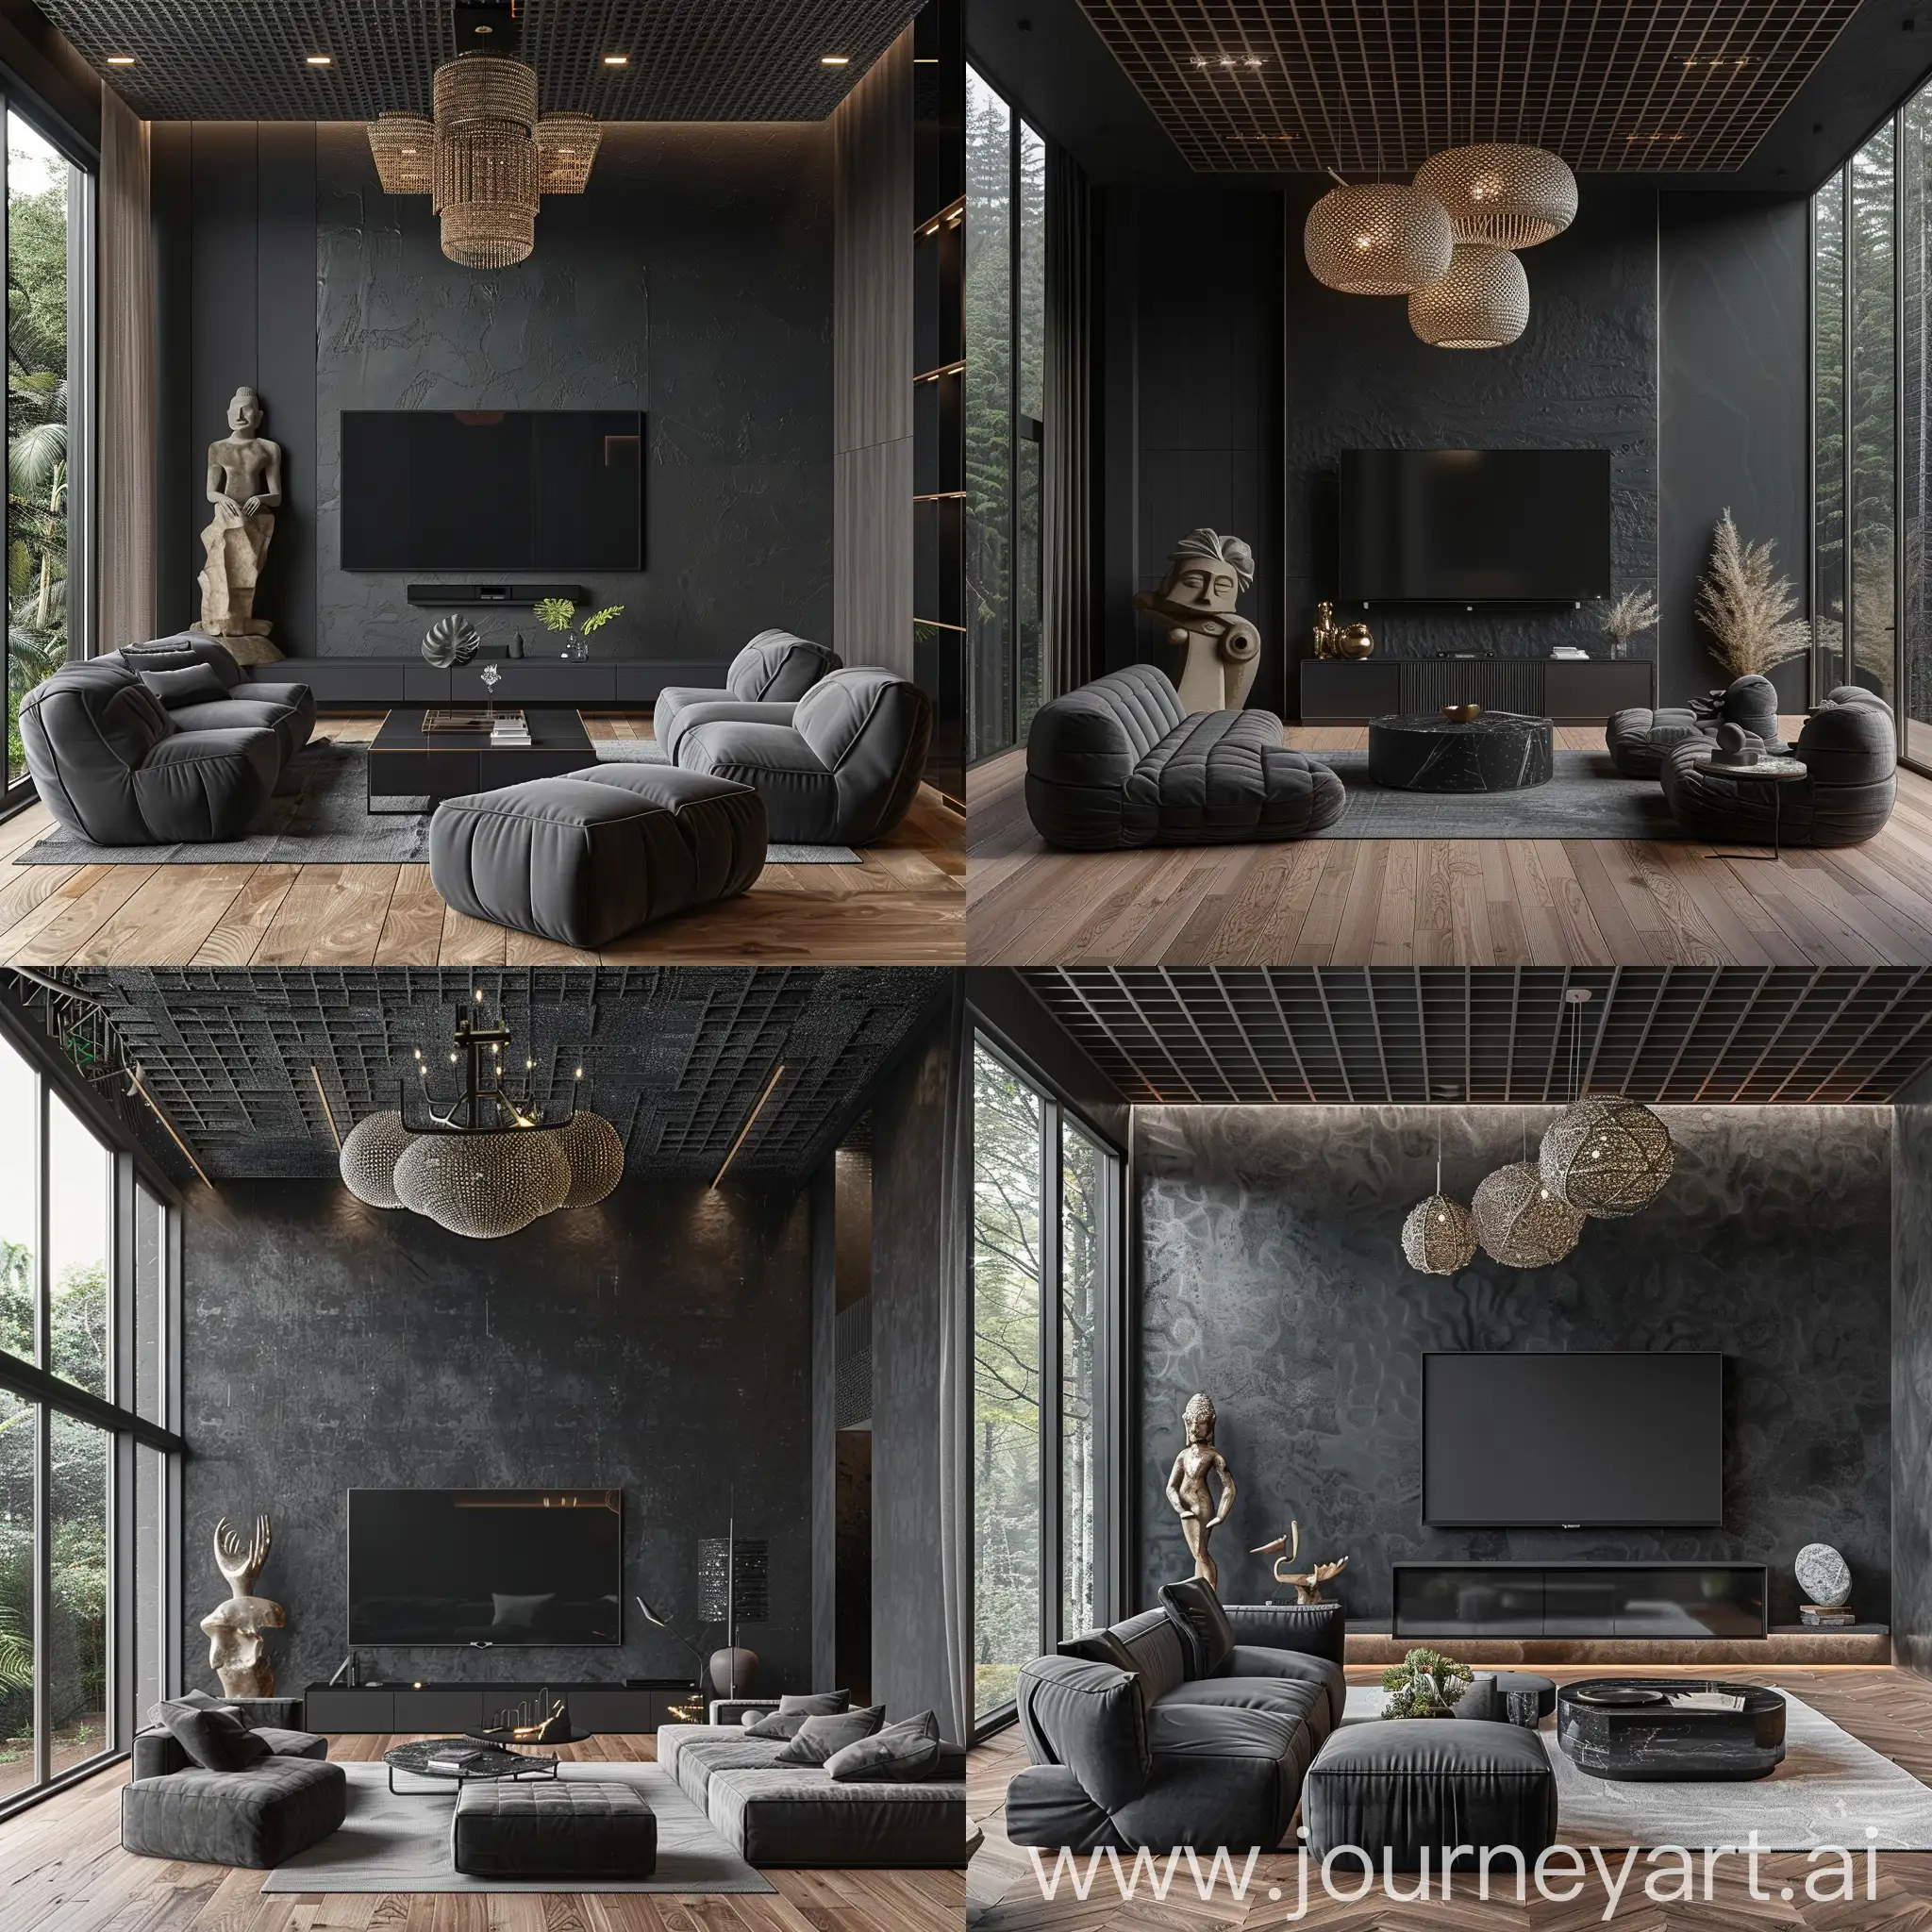 A black gray living room, wooden laminate floor, waffle ceiling, a plaster wall with a TV wall, gray comfortable furniture, modern sculpture, large modern chandelier, soft lighting, decoration, one side of a tall window, in a misty tropical forest, real photo
